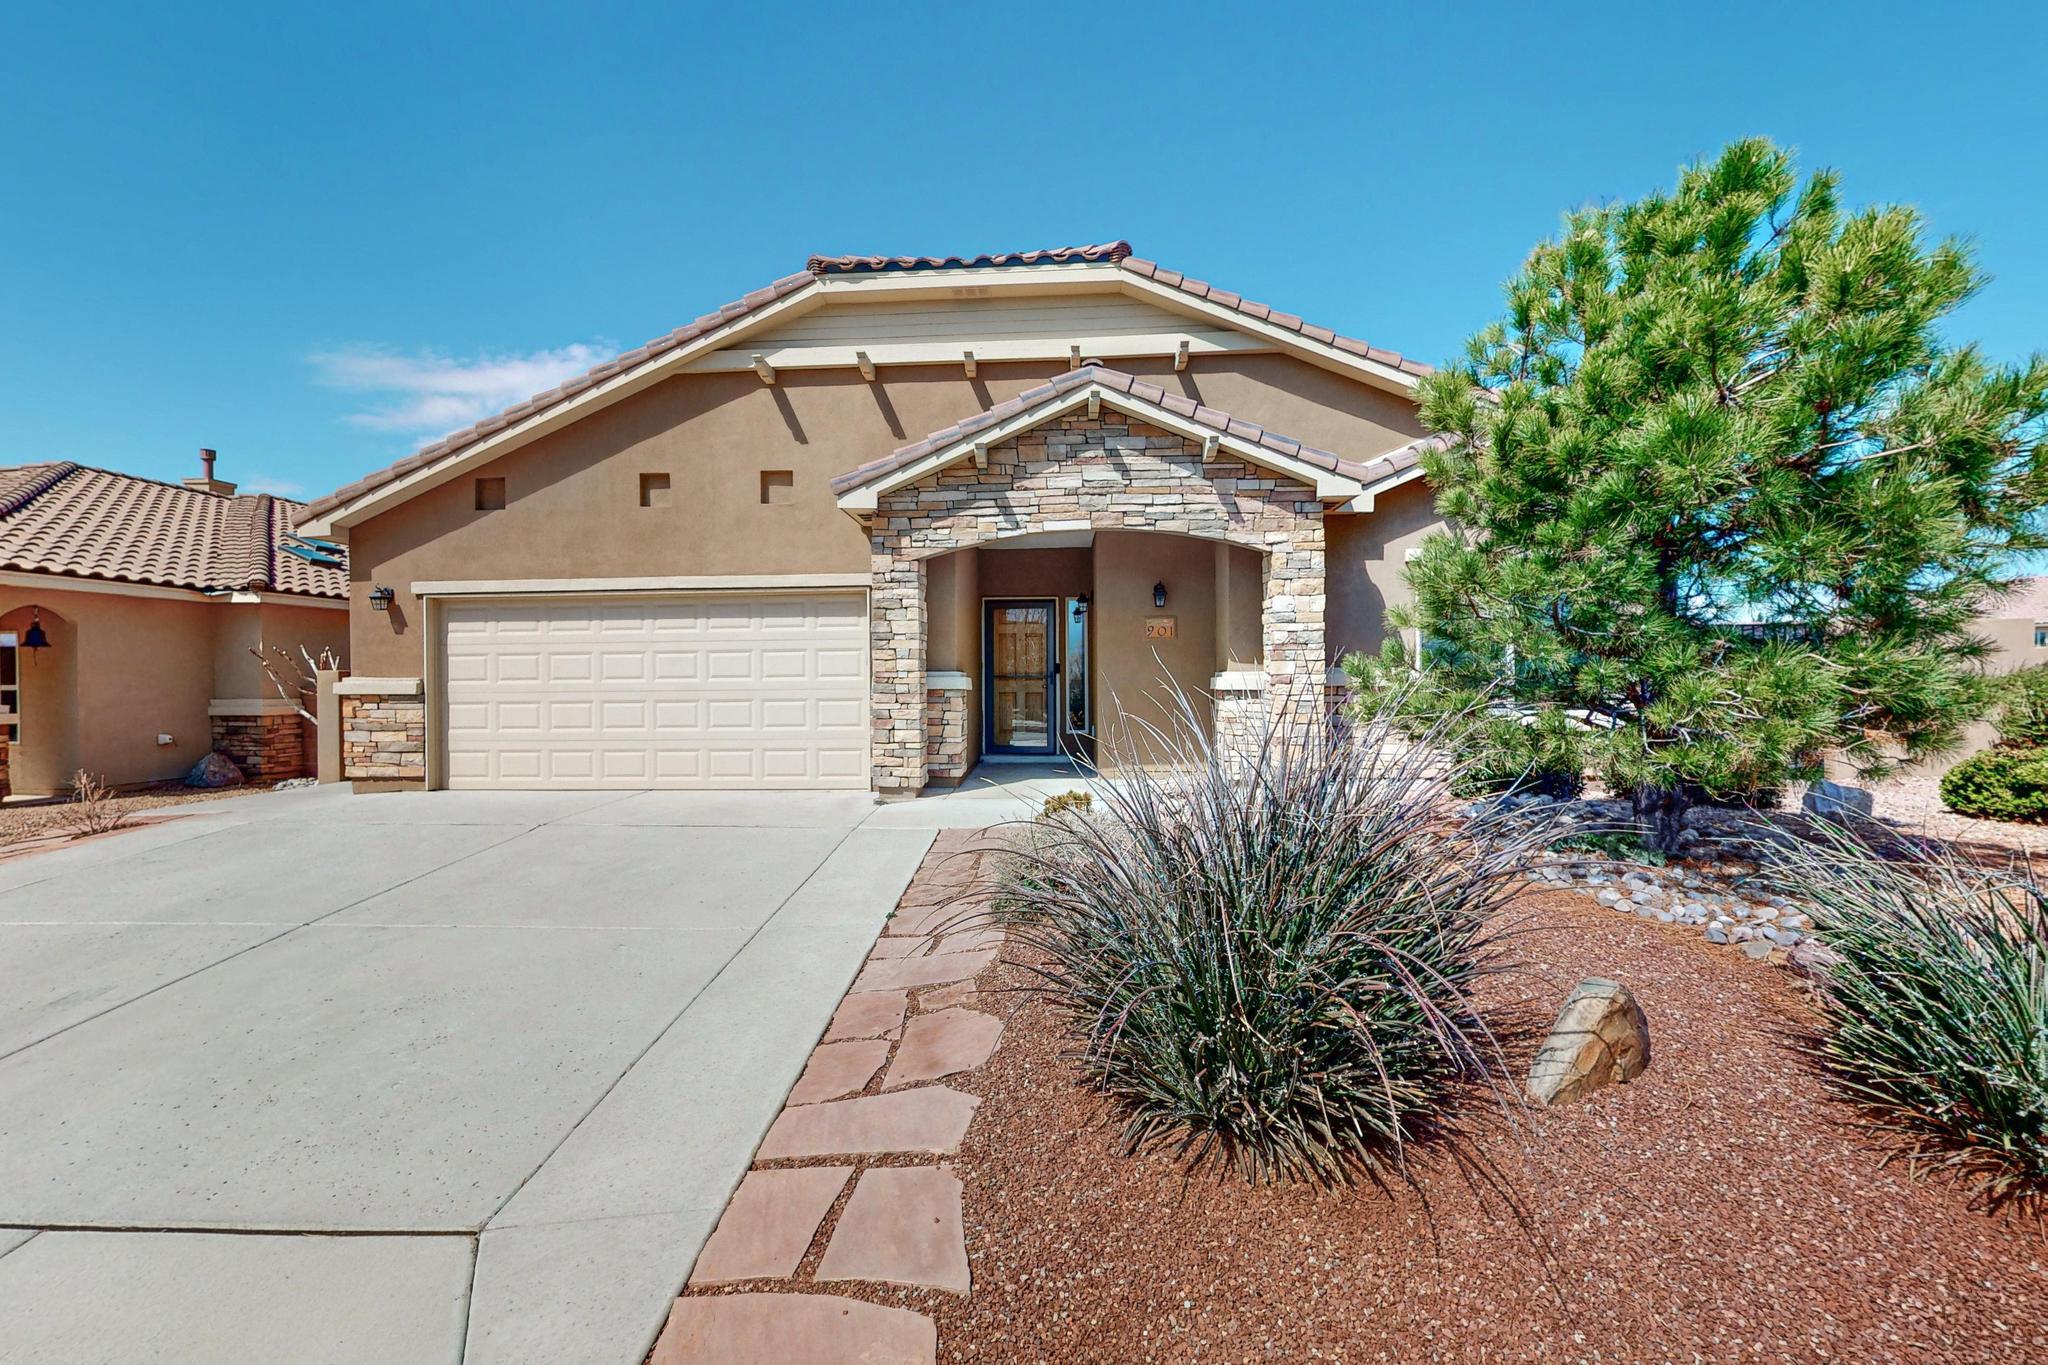 Beautiful Home Located in Del Webb Alegria 55+ Active Adult Community! This ''Cibola'' floorplan w/3BR's, 3BA's plus an Office/Den,  was built in 2013 on a Large Premium Corner Lot with Views from the front & north sides of the home! You'll love all the extras that went into this home including California Closets in all 3 Bedrooms, Custom Kitchen Pantry, Roll Out Trays added in Kitchen Cabinets, Custom Built-In Wall Unit w/Desk in Office, Blower added to FP, Anderson Storm Door, Millard Patio Door, DBL Sinks Added to Guest Bath,  2nd Patio added on the north side for Views, Cabinets & Sink Added to Laundry Room, Niven Pure Water System, Privacy & Extended Walls w/Matching Stucco, Electric Awning, FX Luminaire Landscape Lighting, Raised Garden Beds w/their own Drip System, SEE MORE!